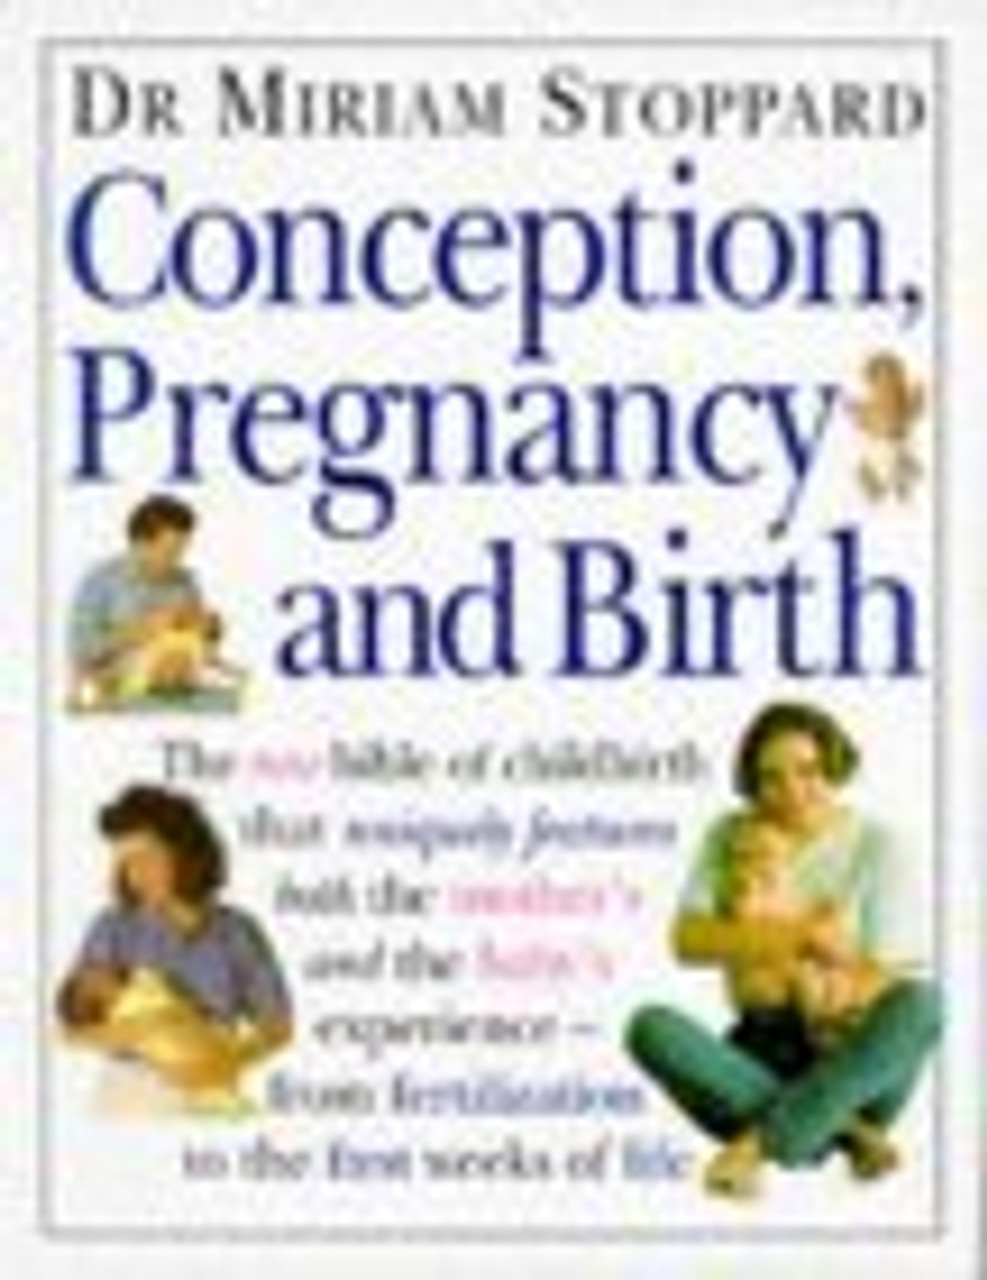 Miriam Stoppard / Conception, Pregnancy and Birth (Coffee Table book)